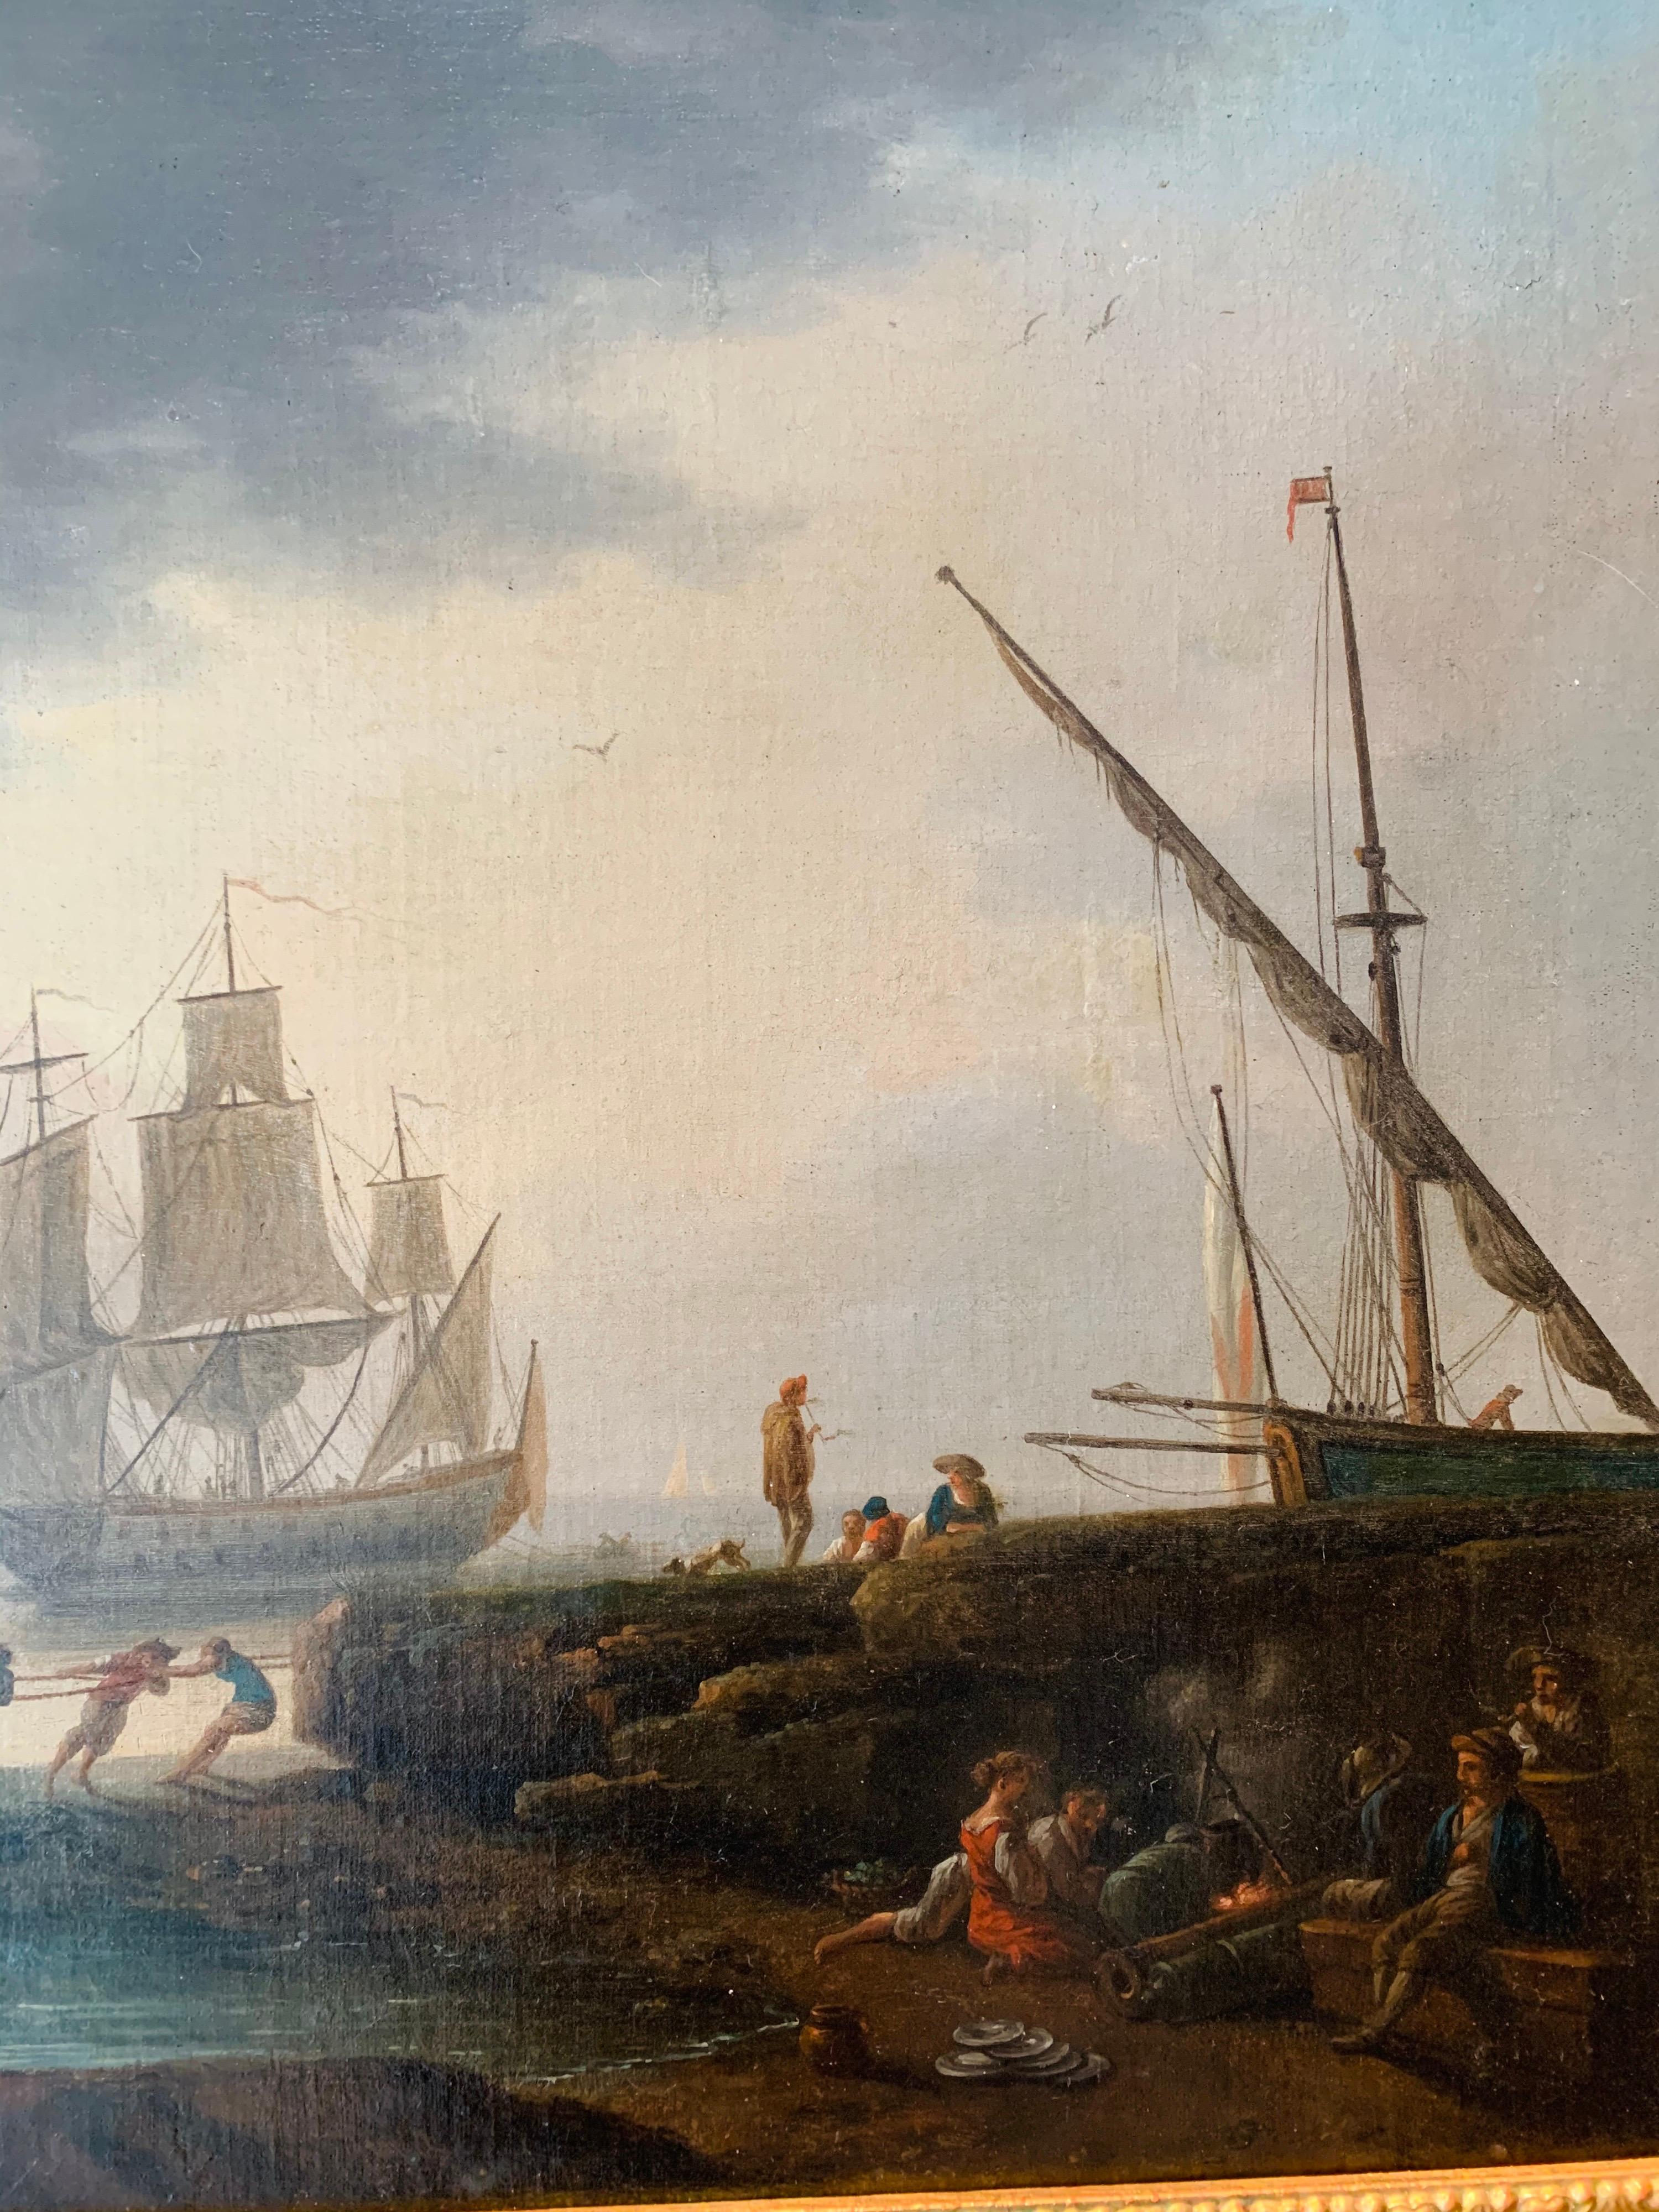 Large 18th century French painting depicting a Mediterranean harbour scene

This magnificent painting beautifully captures a sunset over the Mediterranean. The sunset is the focal point of the composition and dares you into the painting. However,